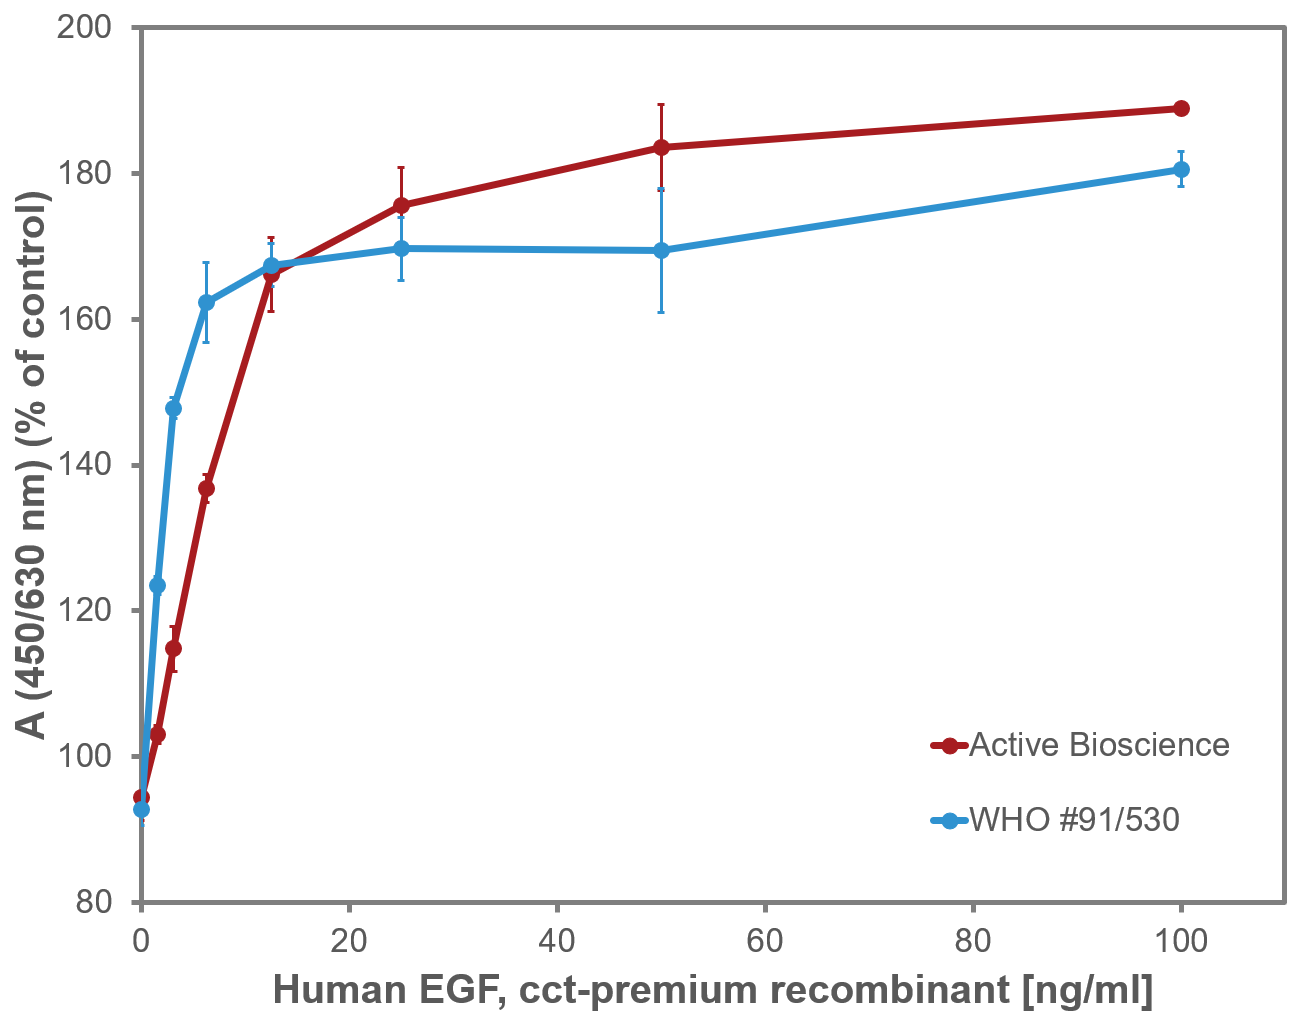 <strong>Fig. 2</strong>: Measurement of the dose-dependent stimulation of cell proliferation in Normal Human Dermal Fibroblast (NHDF) cells by recombinant human EGF, cct-premium and WHO standard 91/530. Values are the means (±SD) of triplicate determinations and expressed as percentage of control.